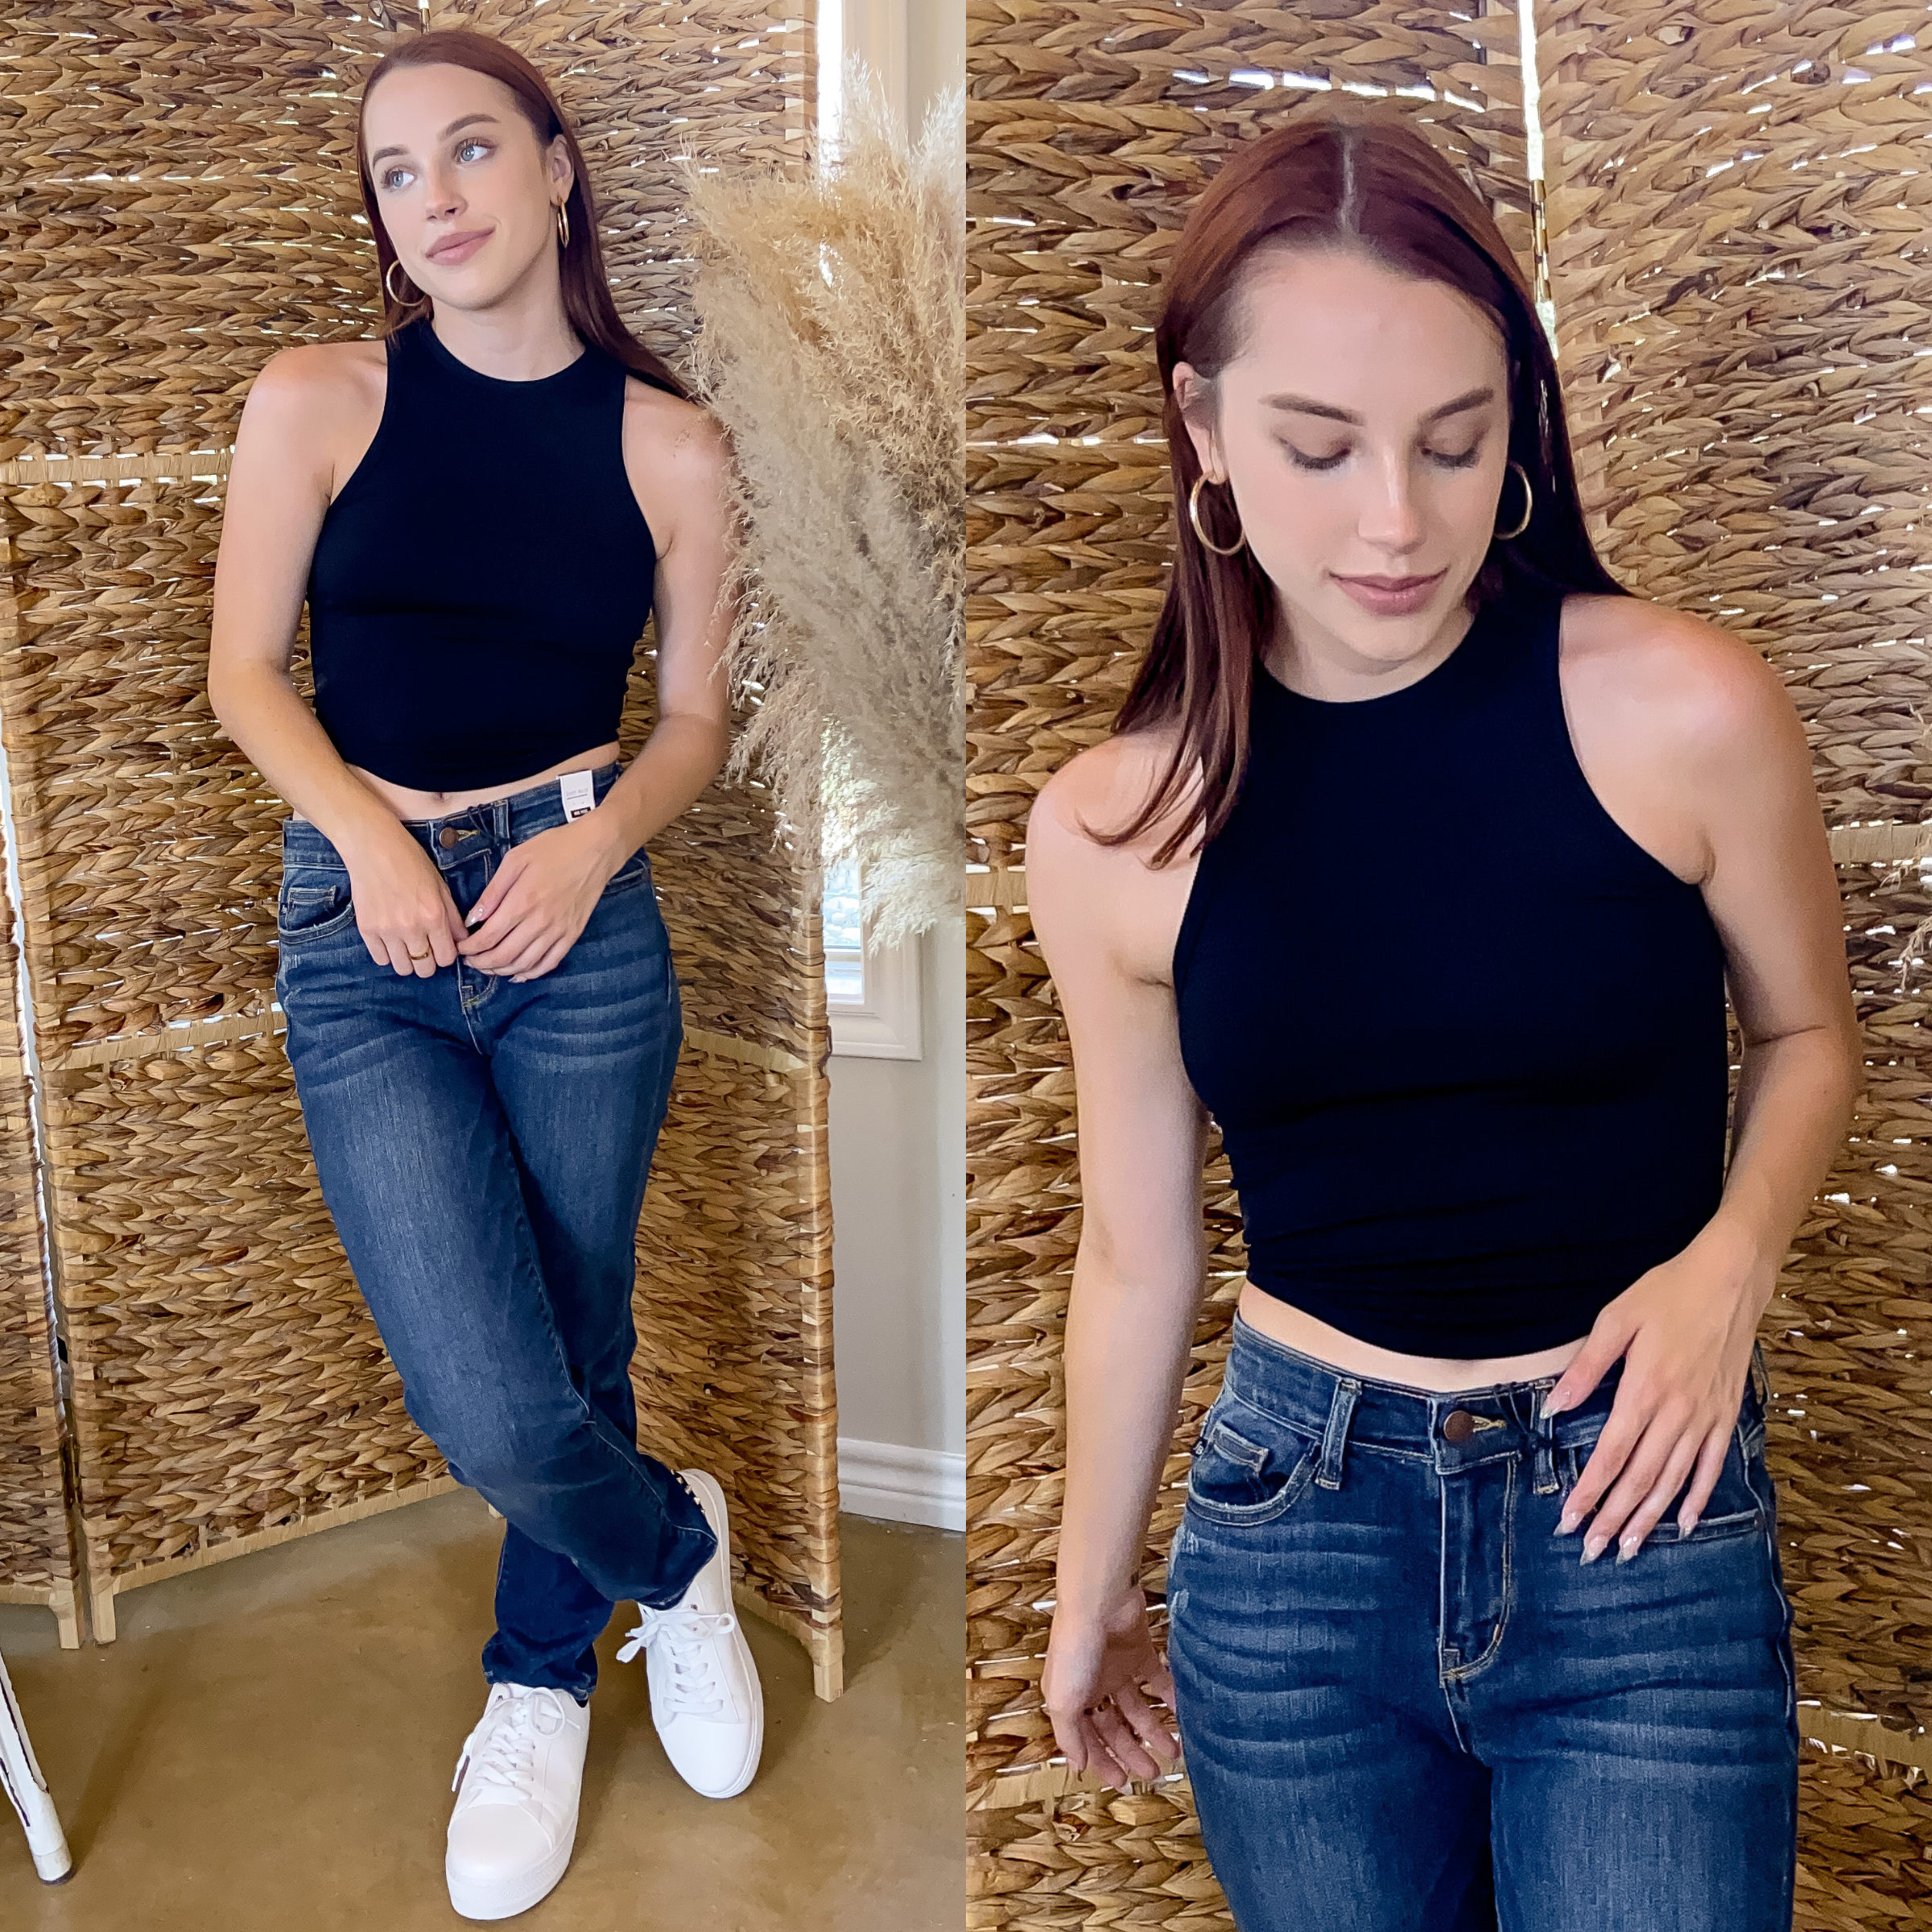 Model is wearings a black, scoop neck cropped tank top with dark blue jeans. She is also wearing gold hoops and white tennis shoes.